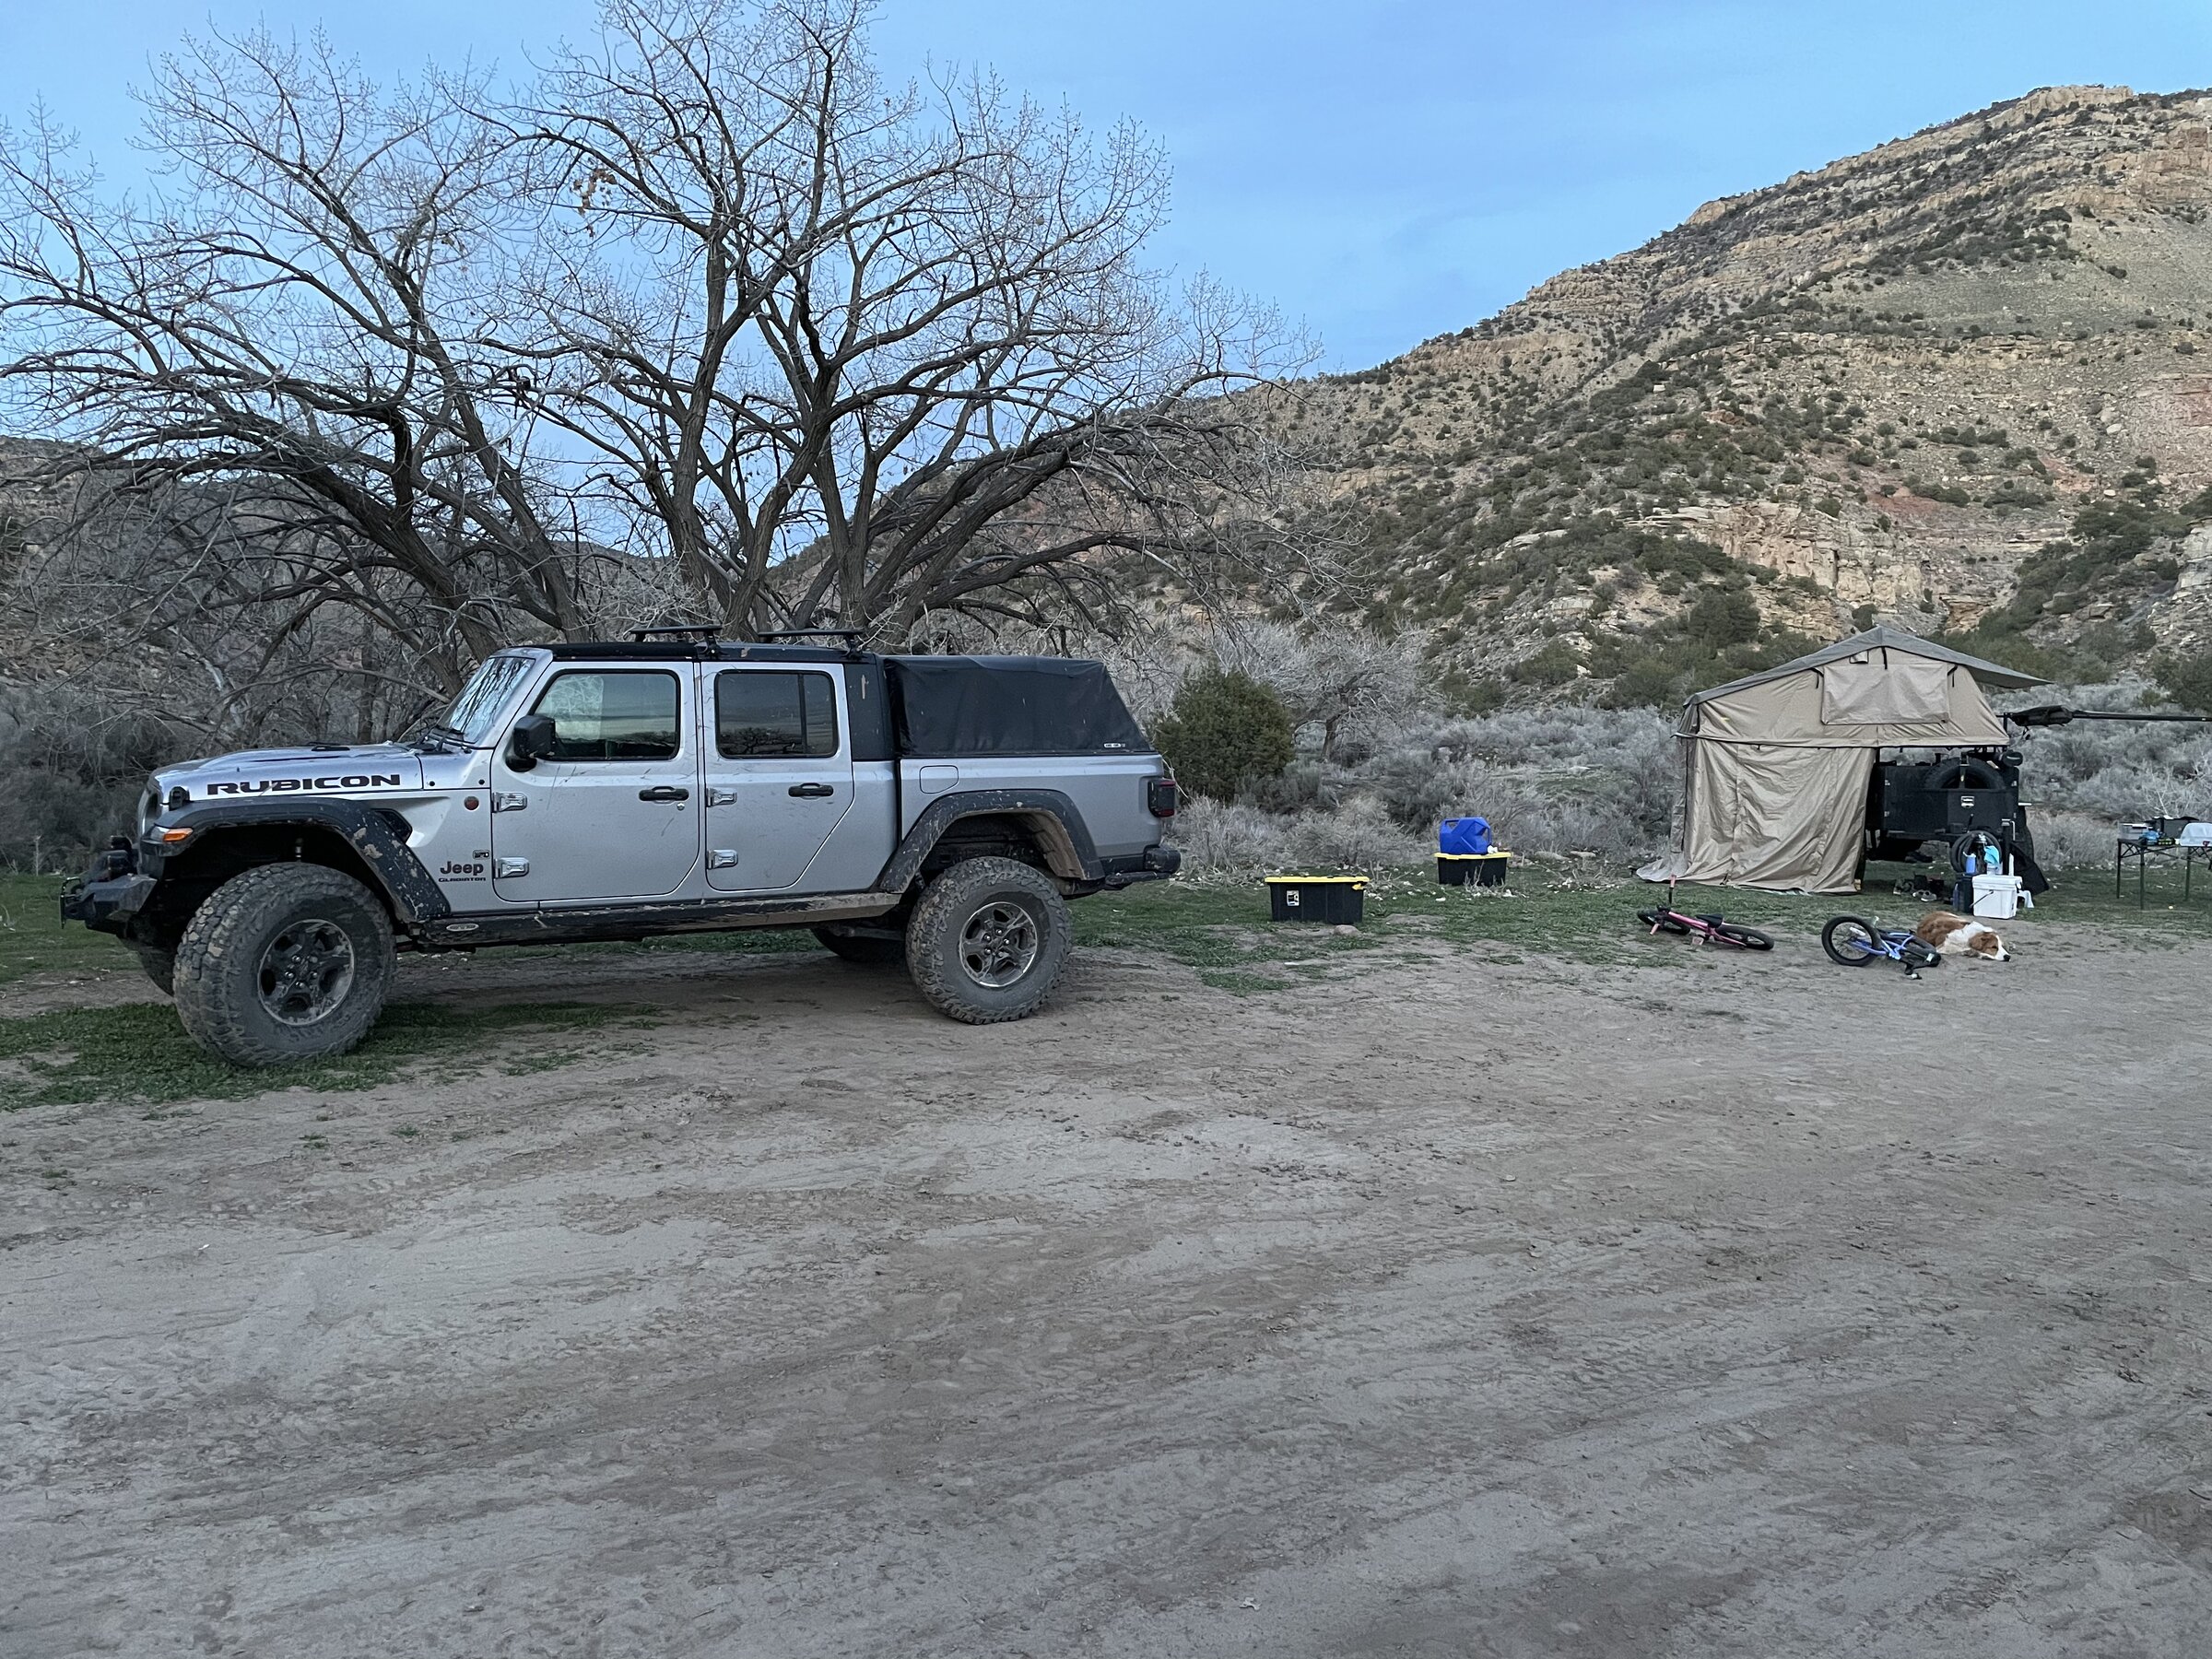 Jeep Gladiator Camping with your Gladiator 5D1102B2-F000-4C89-9CF0-4326EF634AED